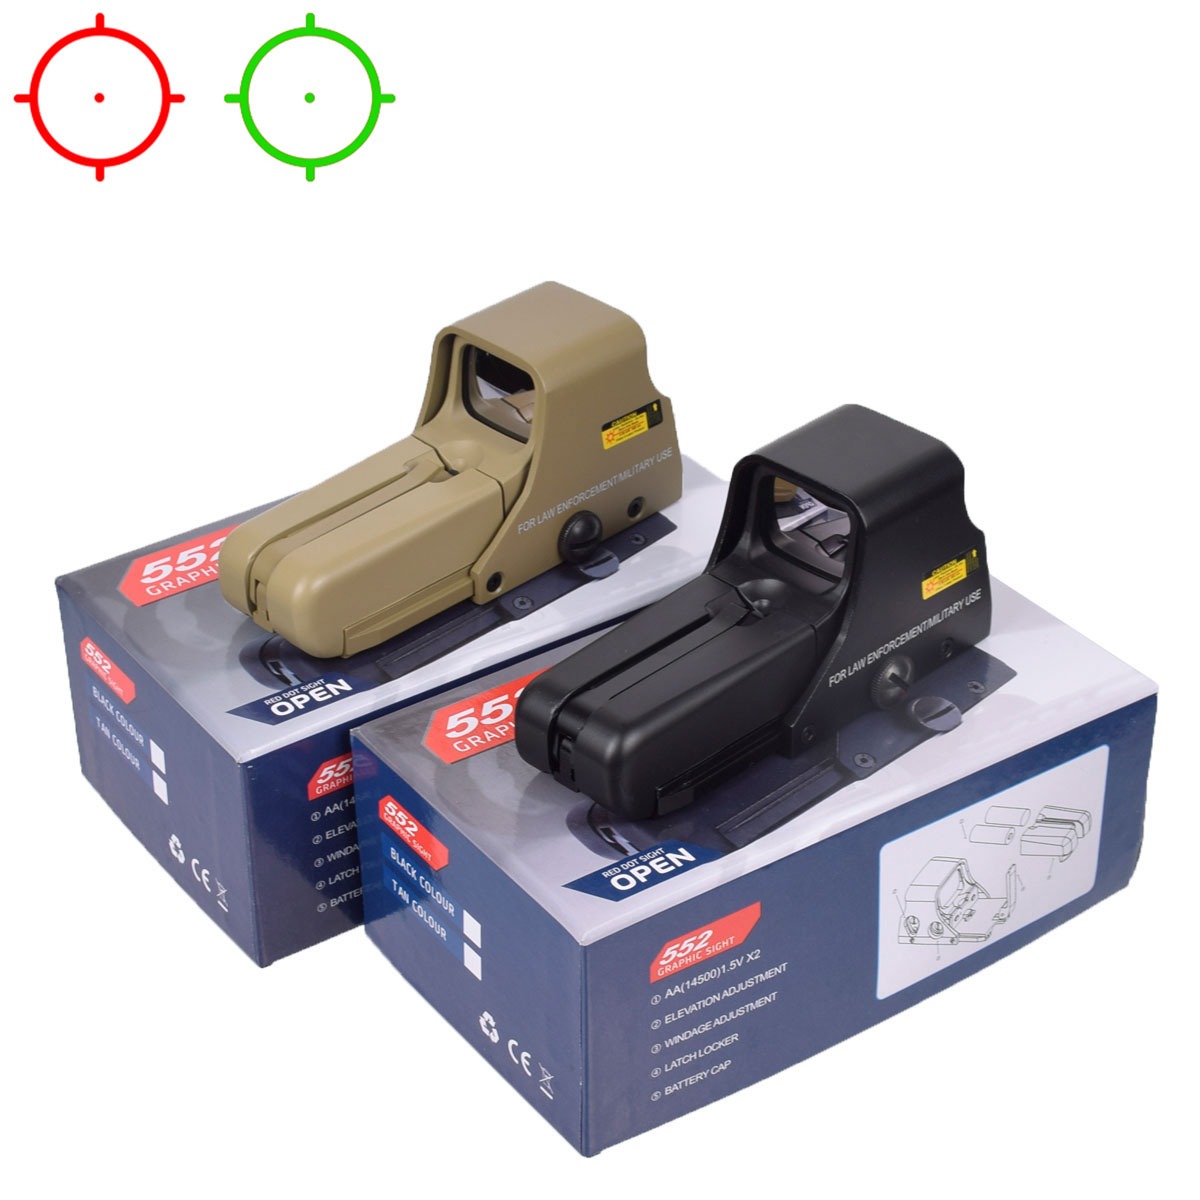 552 556 type Holographic red & green dot sight Batteries Airsoft 551 